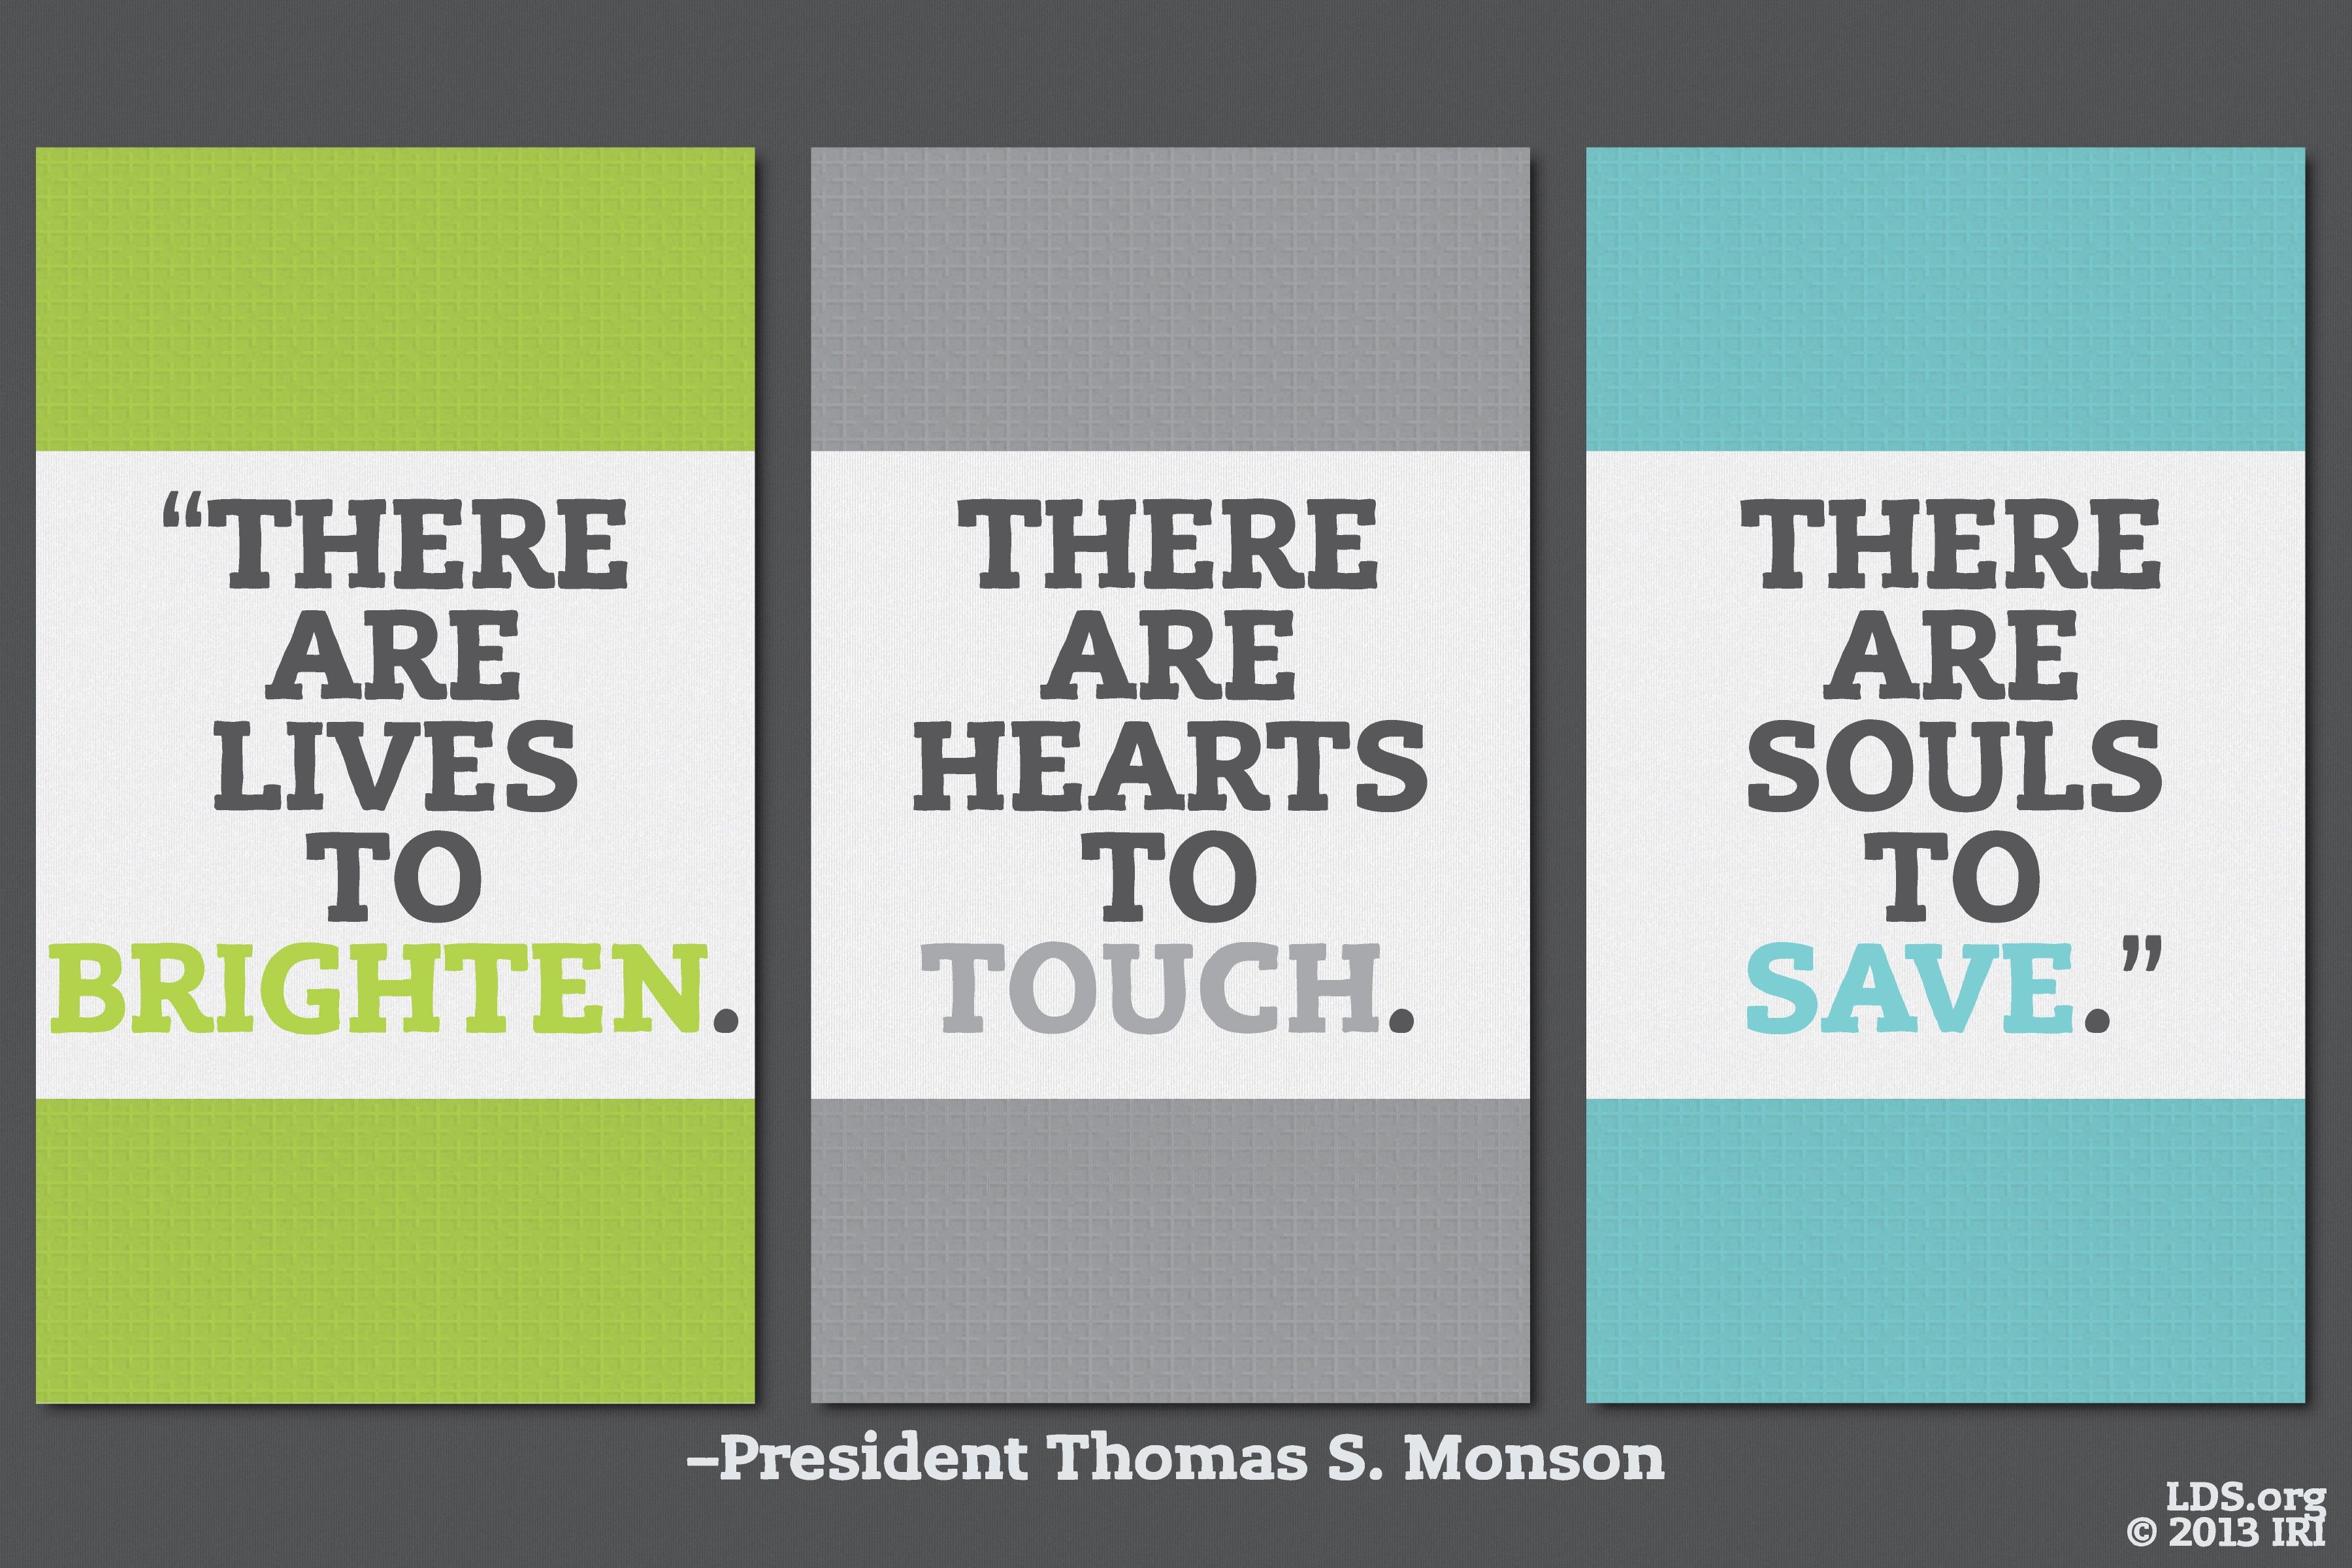 “There are lives to brighten. There are hearts to touch. There are souls to save.”—President Thomas S. Monson, “True Shepherds”